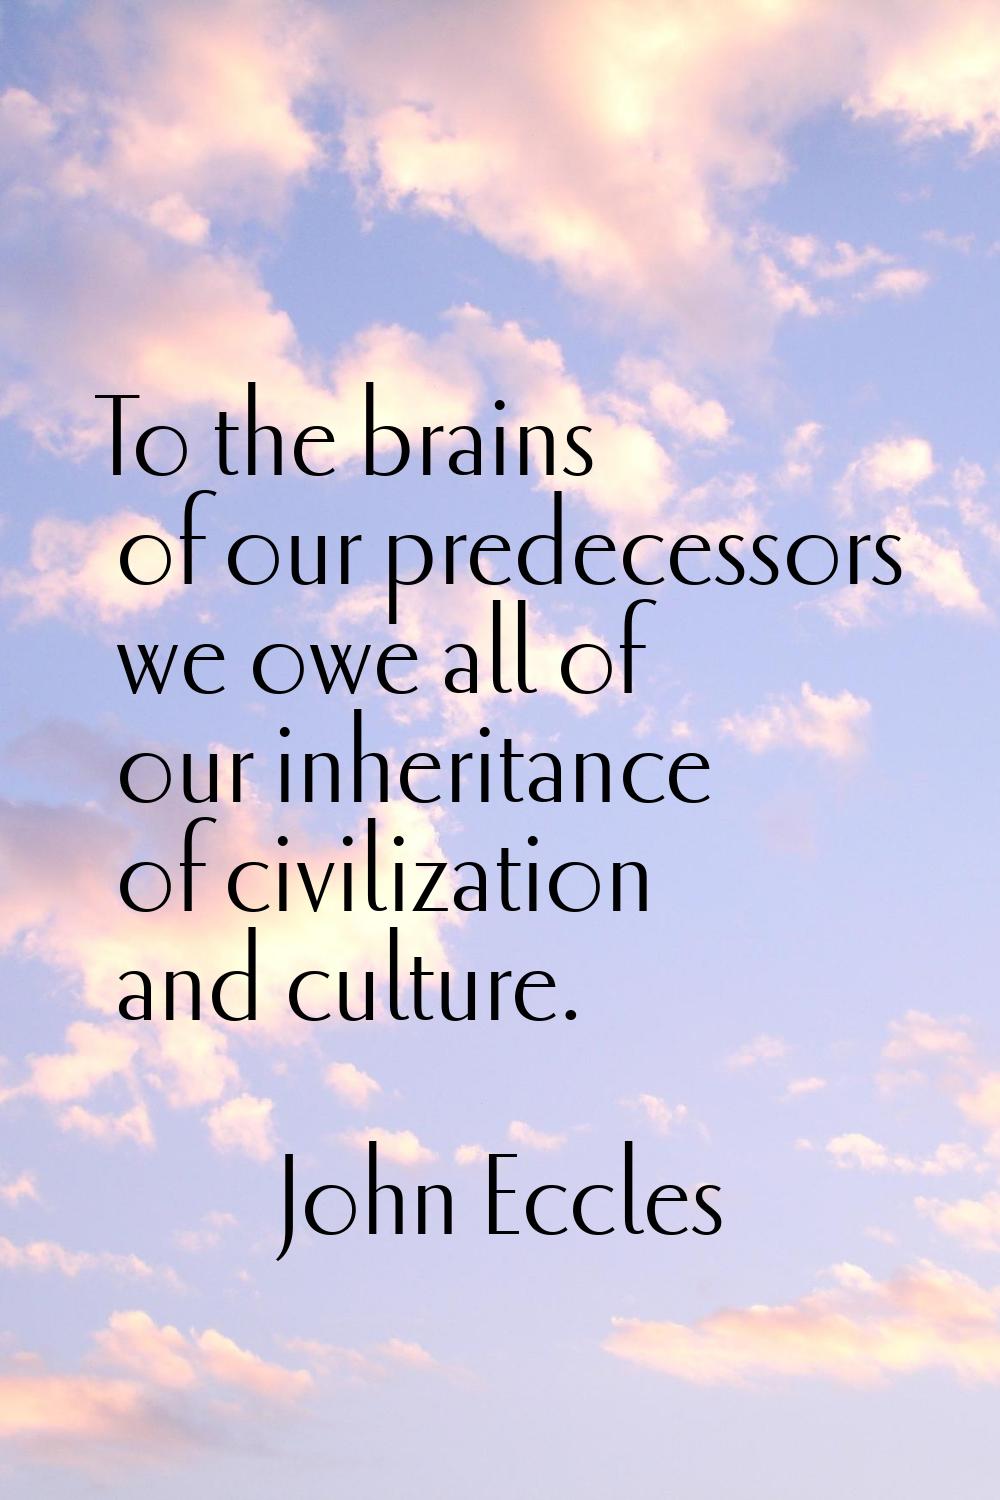 To the brains of our predecessors we owe all of our inheritance of civilization and culture.